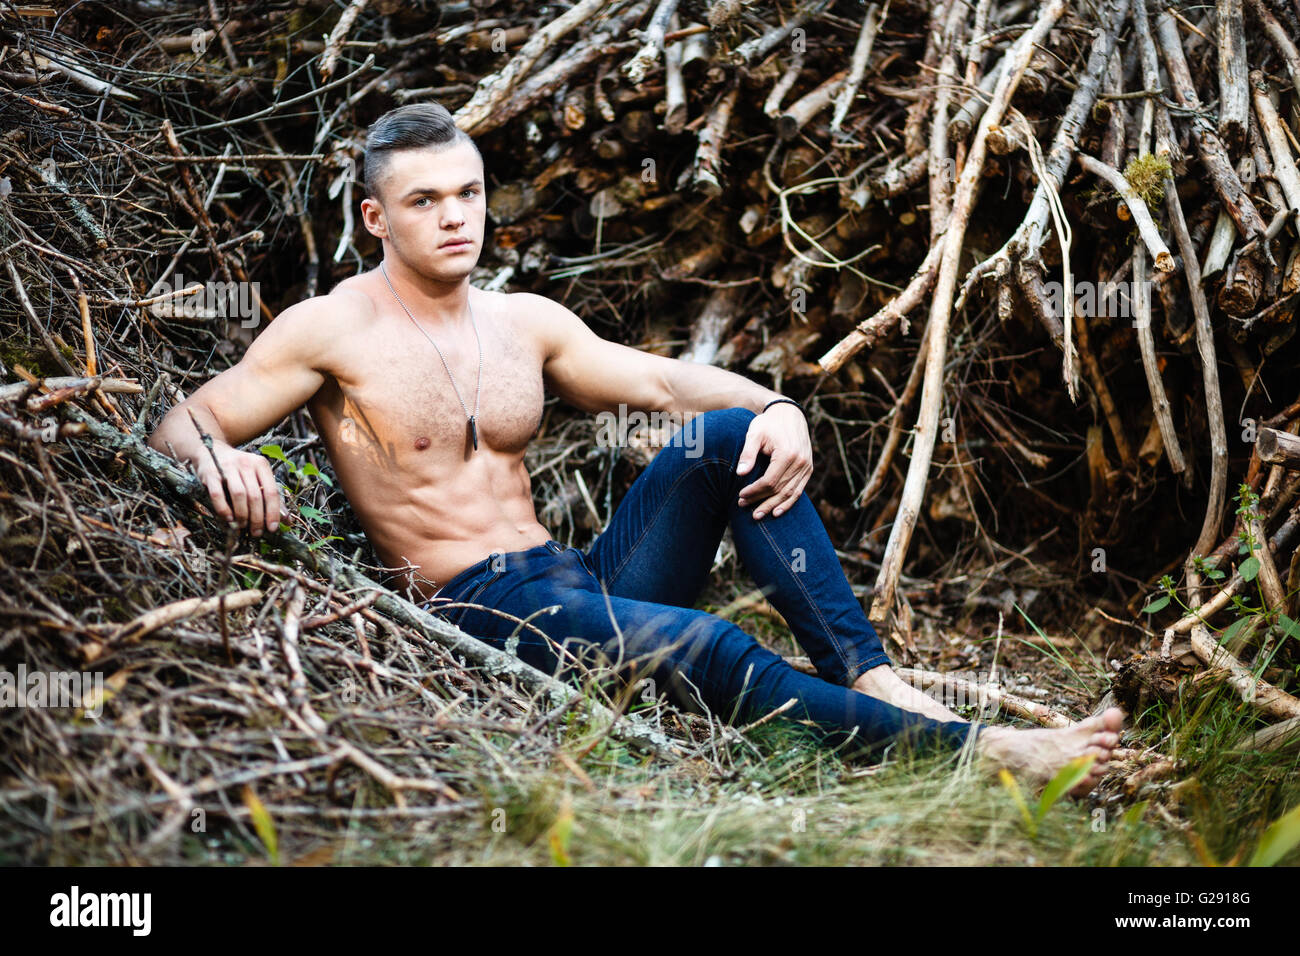 Muscular man in forest Stock Photo